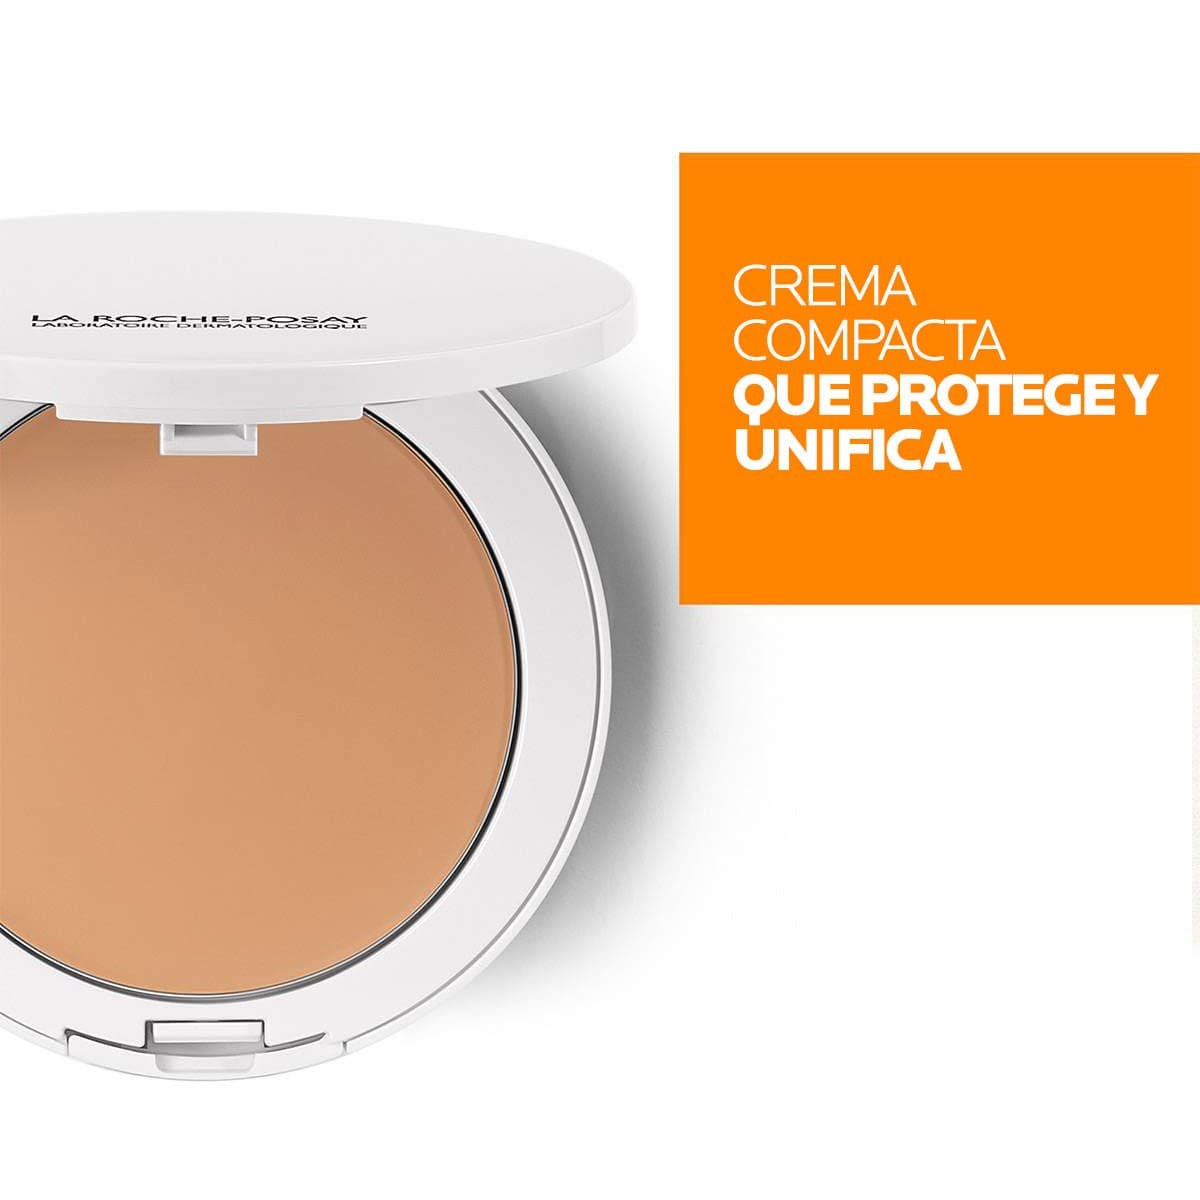 La Roche Posay ProductPage Sun Anthelios XL Compact Spf50 Shade 01 9g 